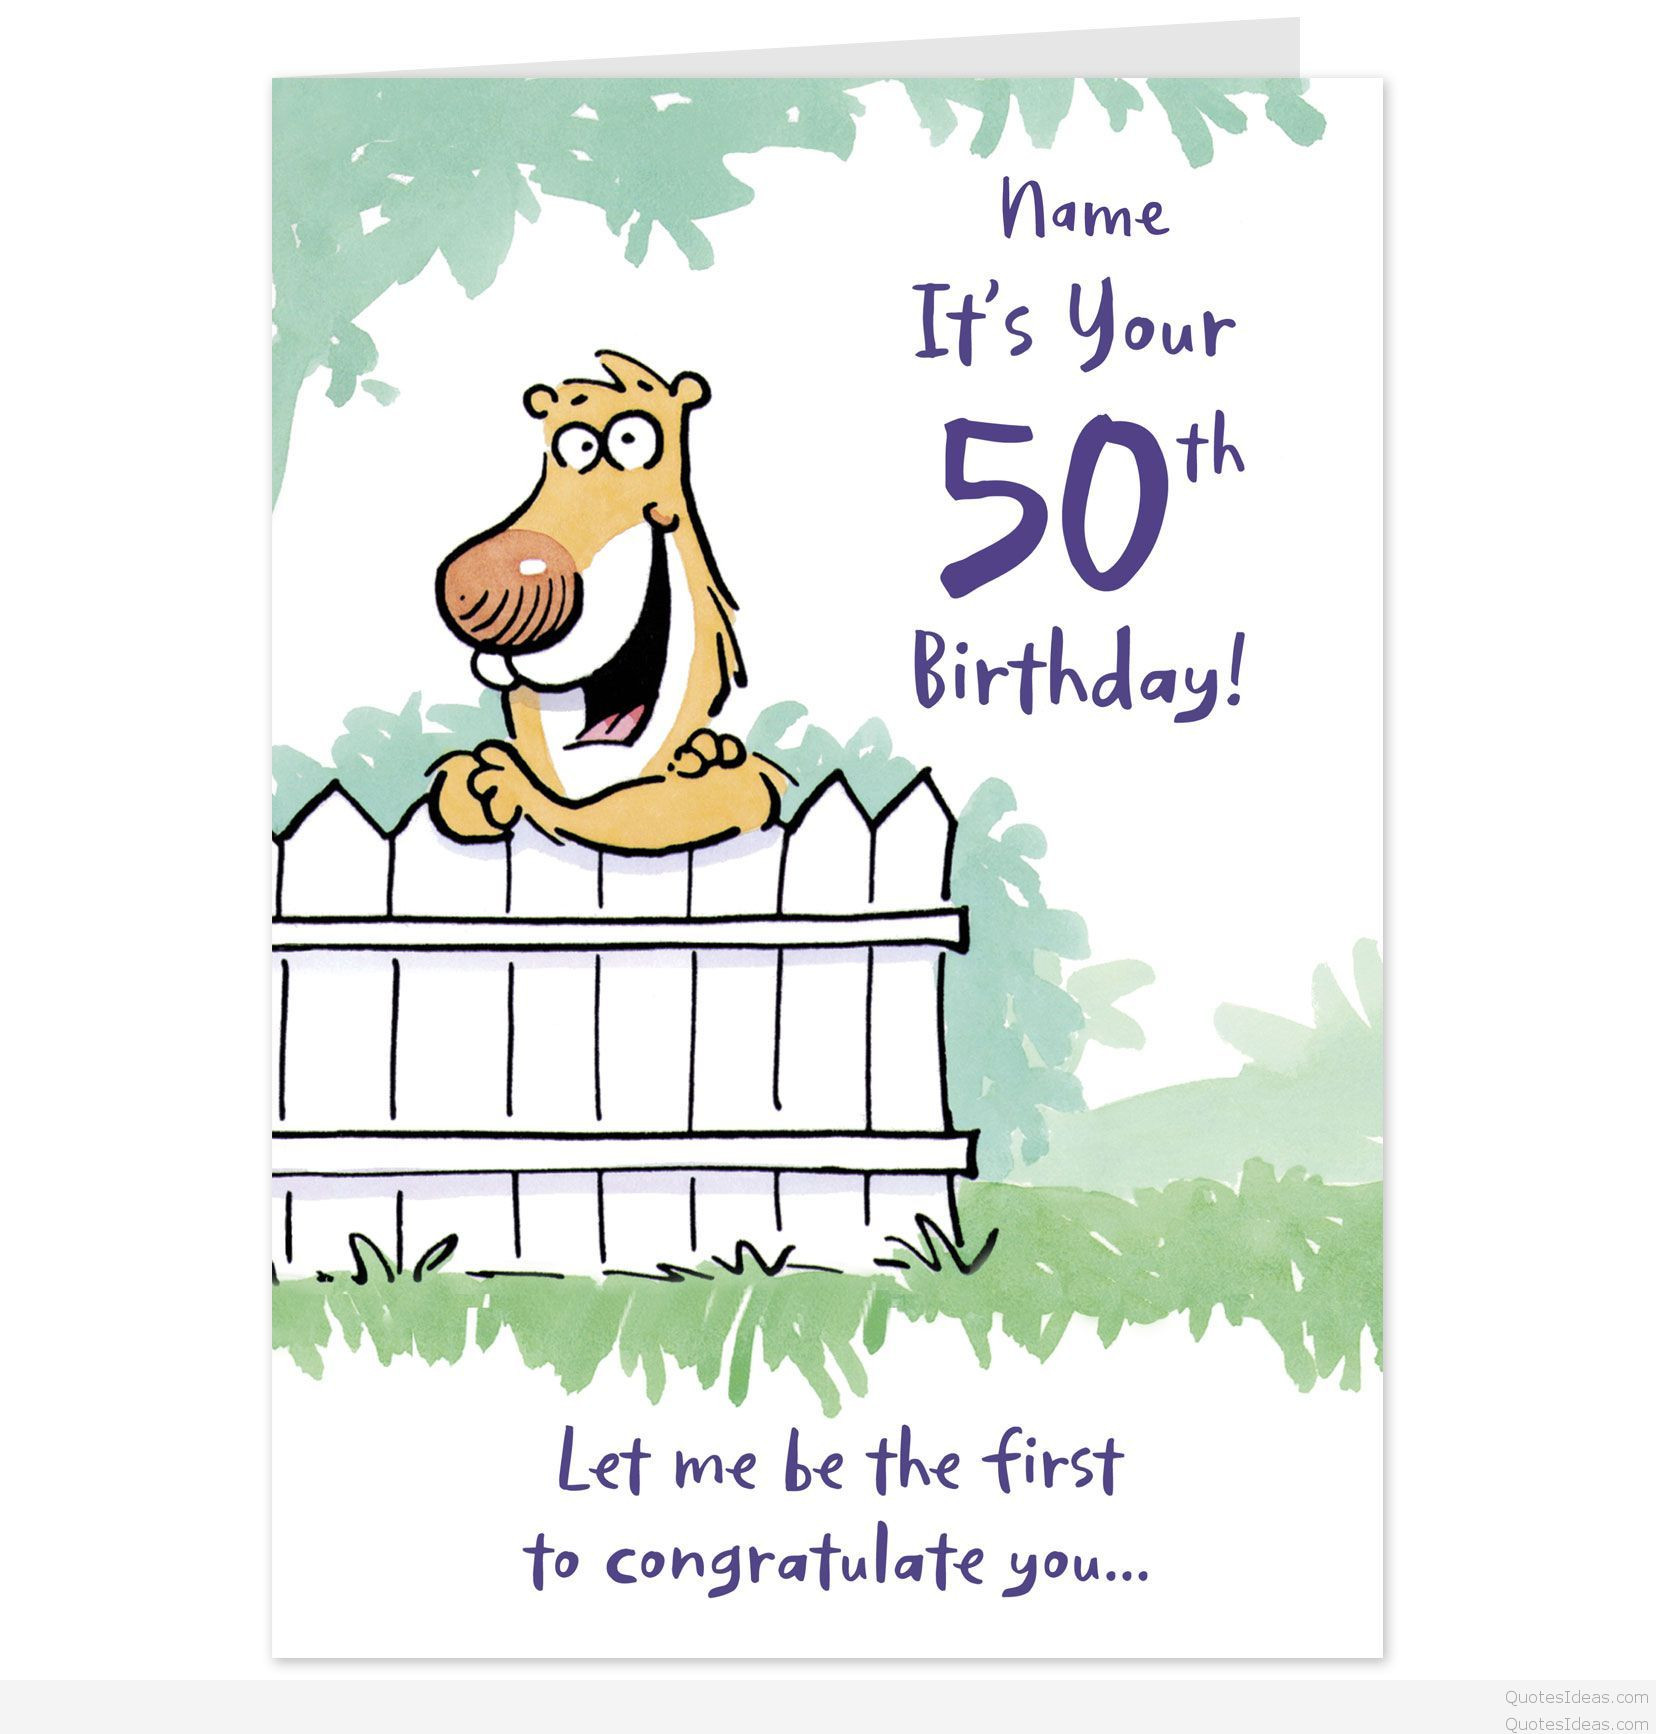 Funny Birthday Card Message
 Latest funny cards quotes and sayings